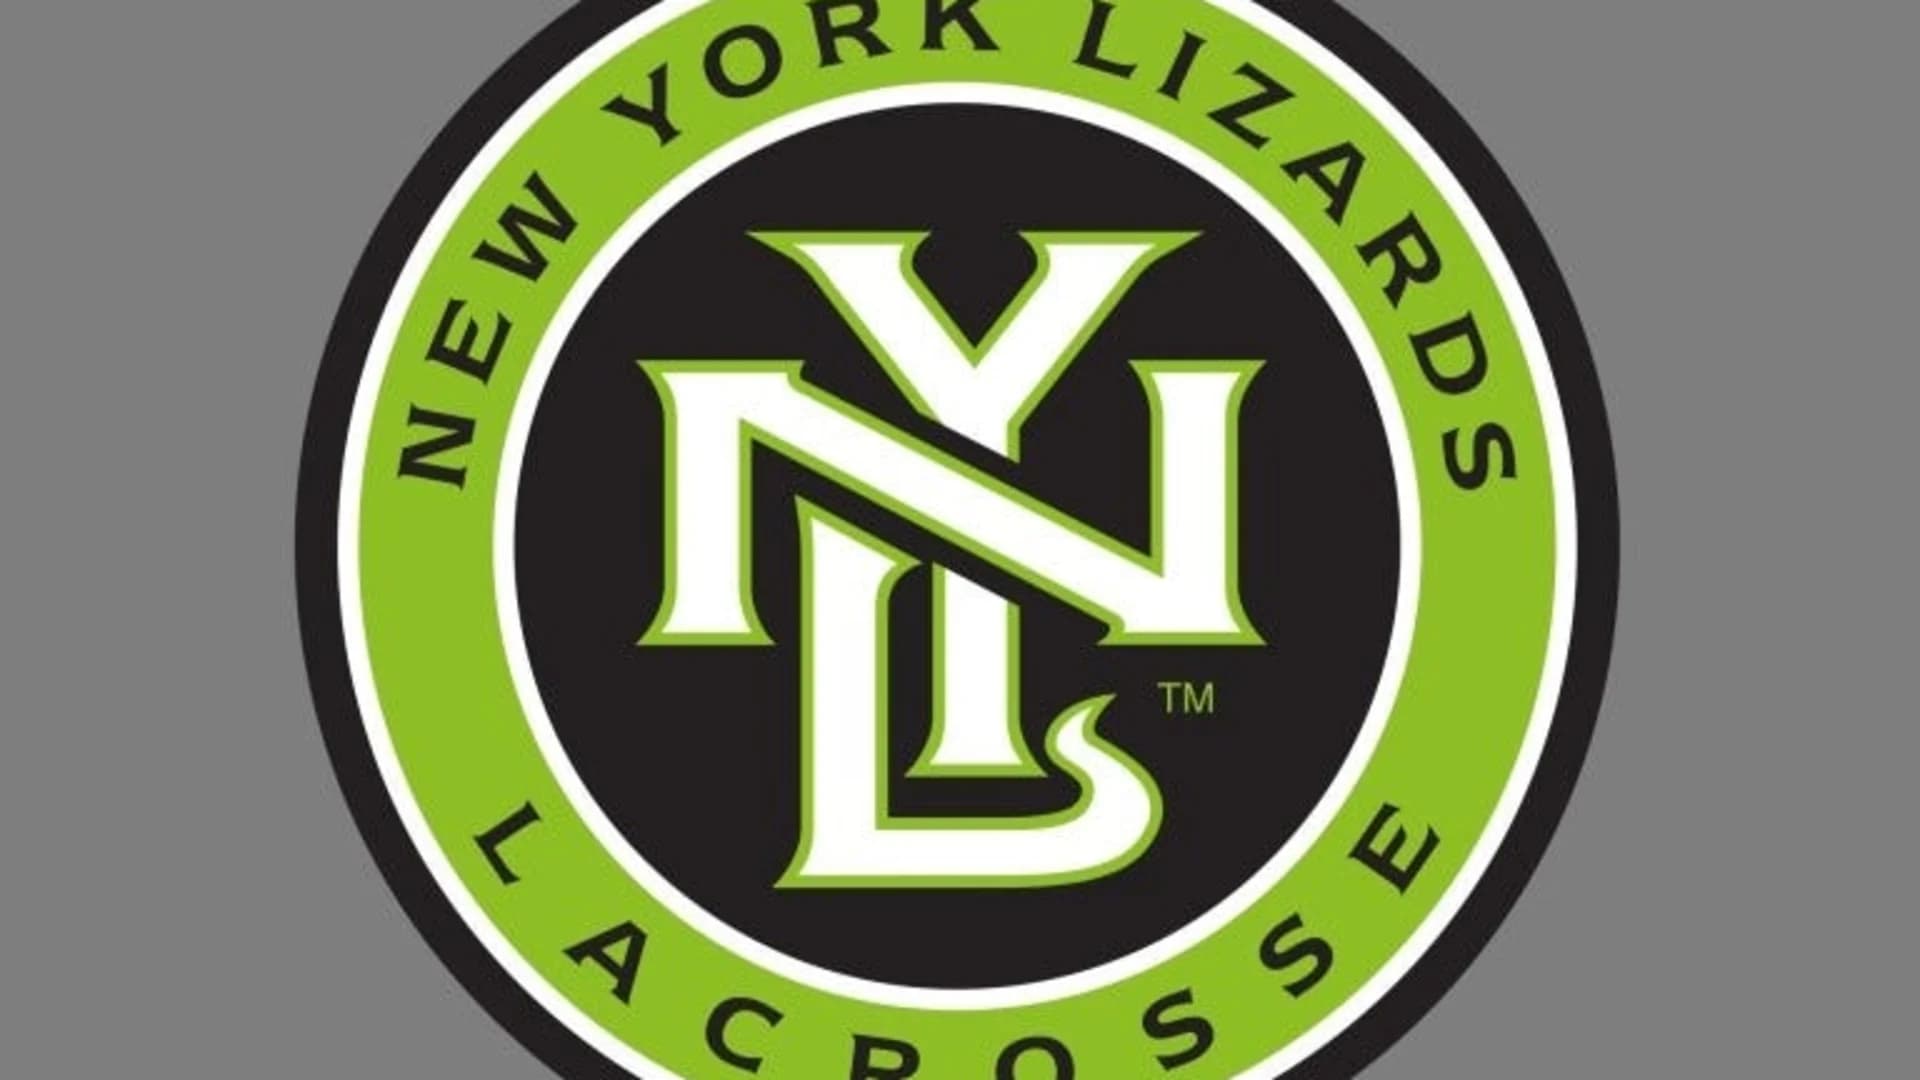 New York Lizards' 2020 season delayed due to COVID-19